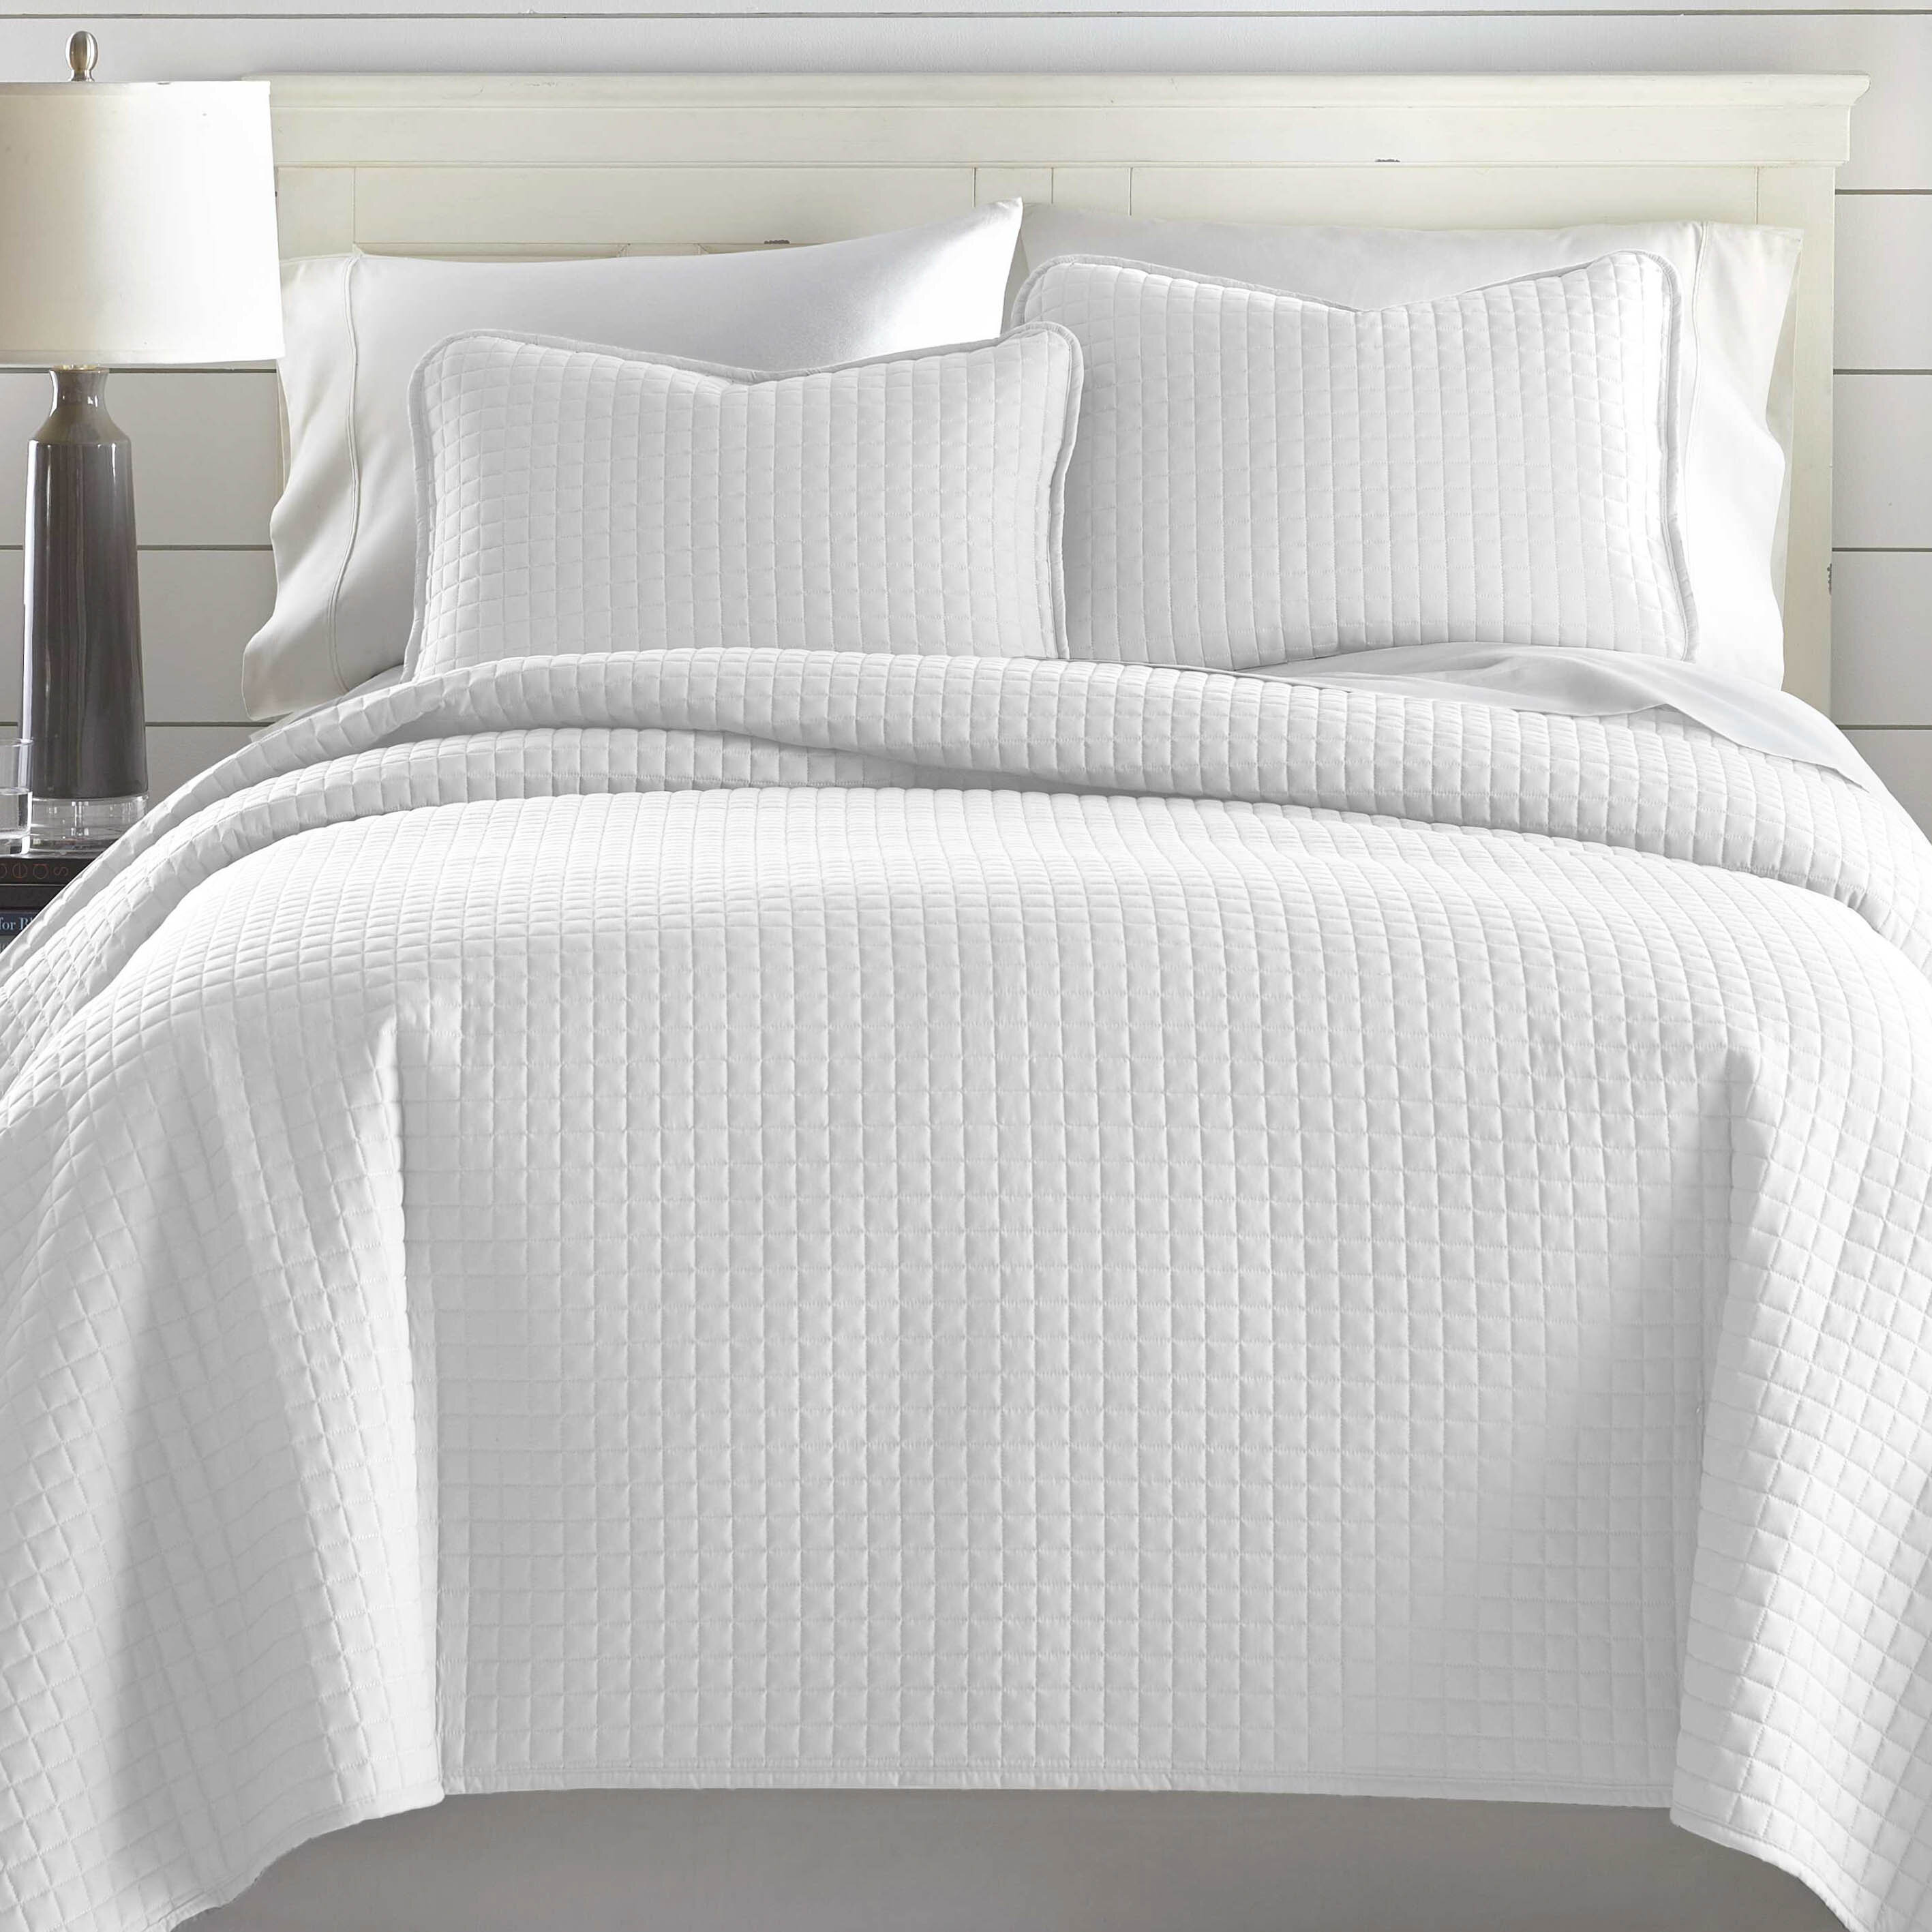 Cottage French Country Bedding Sets You Ll Love In 2021 Wayfair